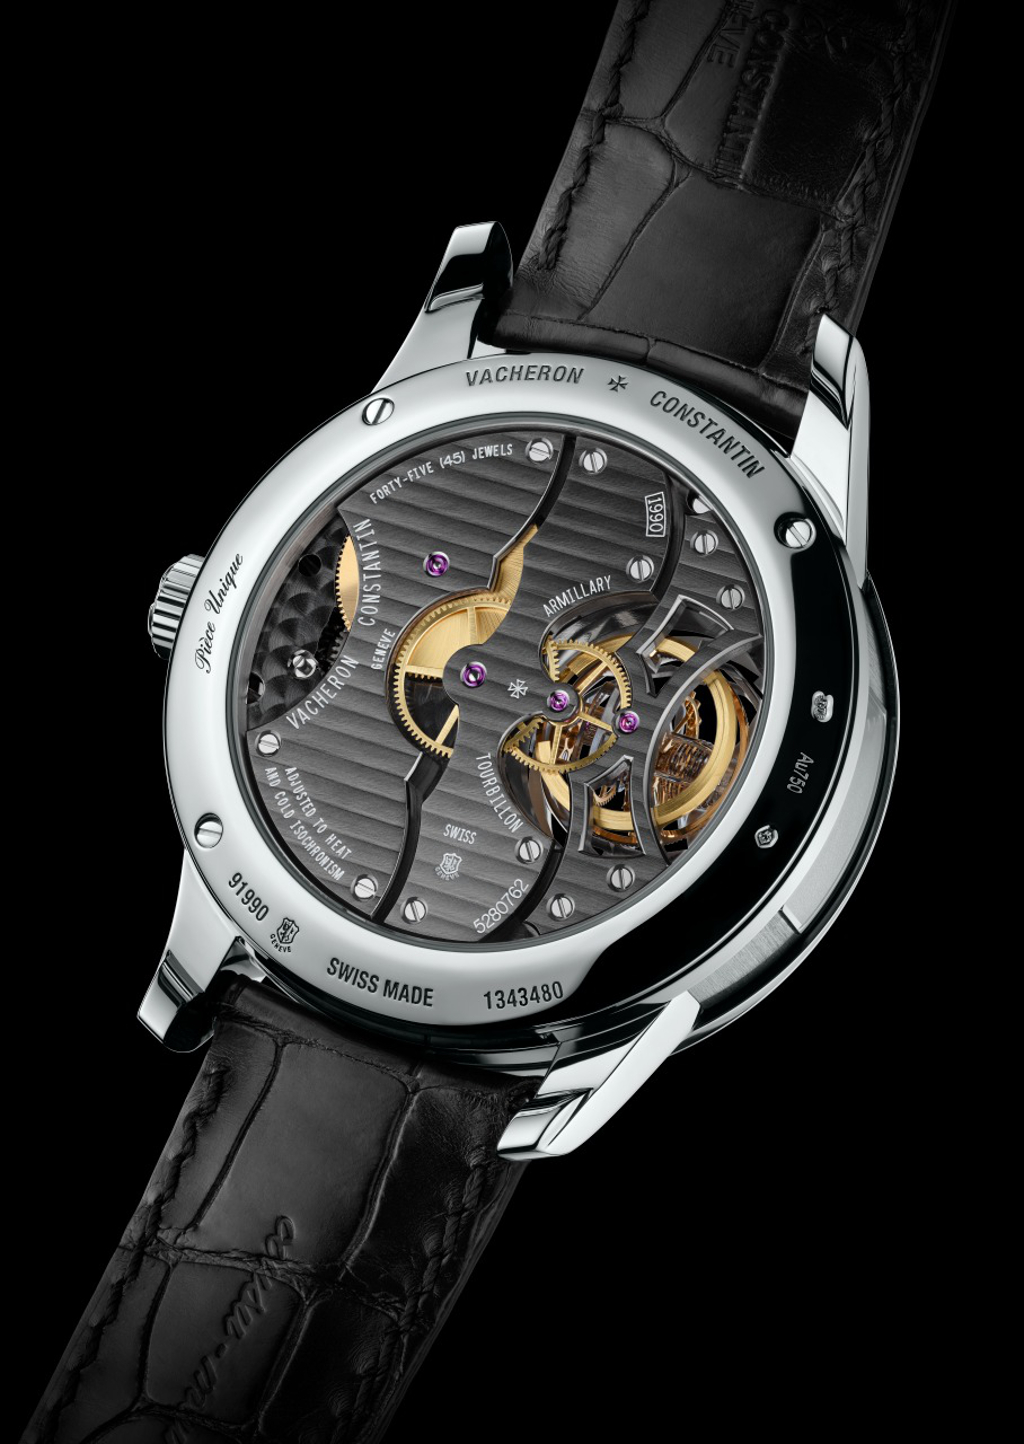 The caseback of the watch. Notice the intricate finishing of the movement. 